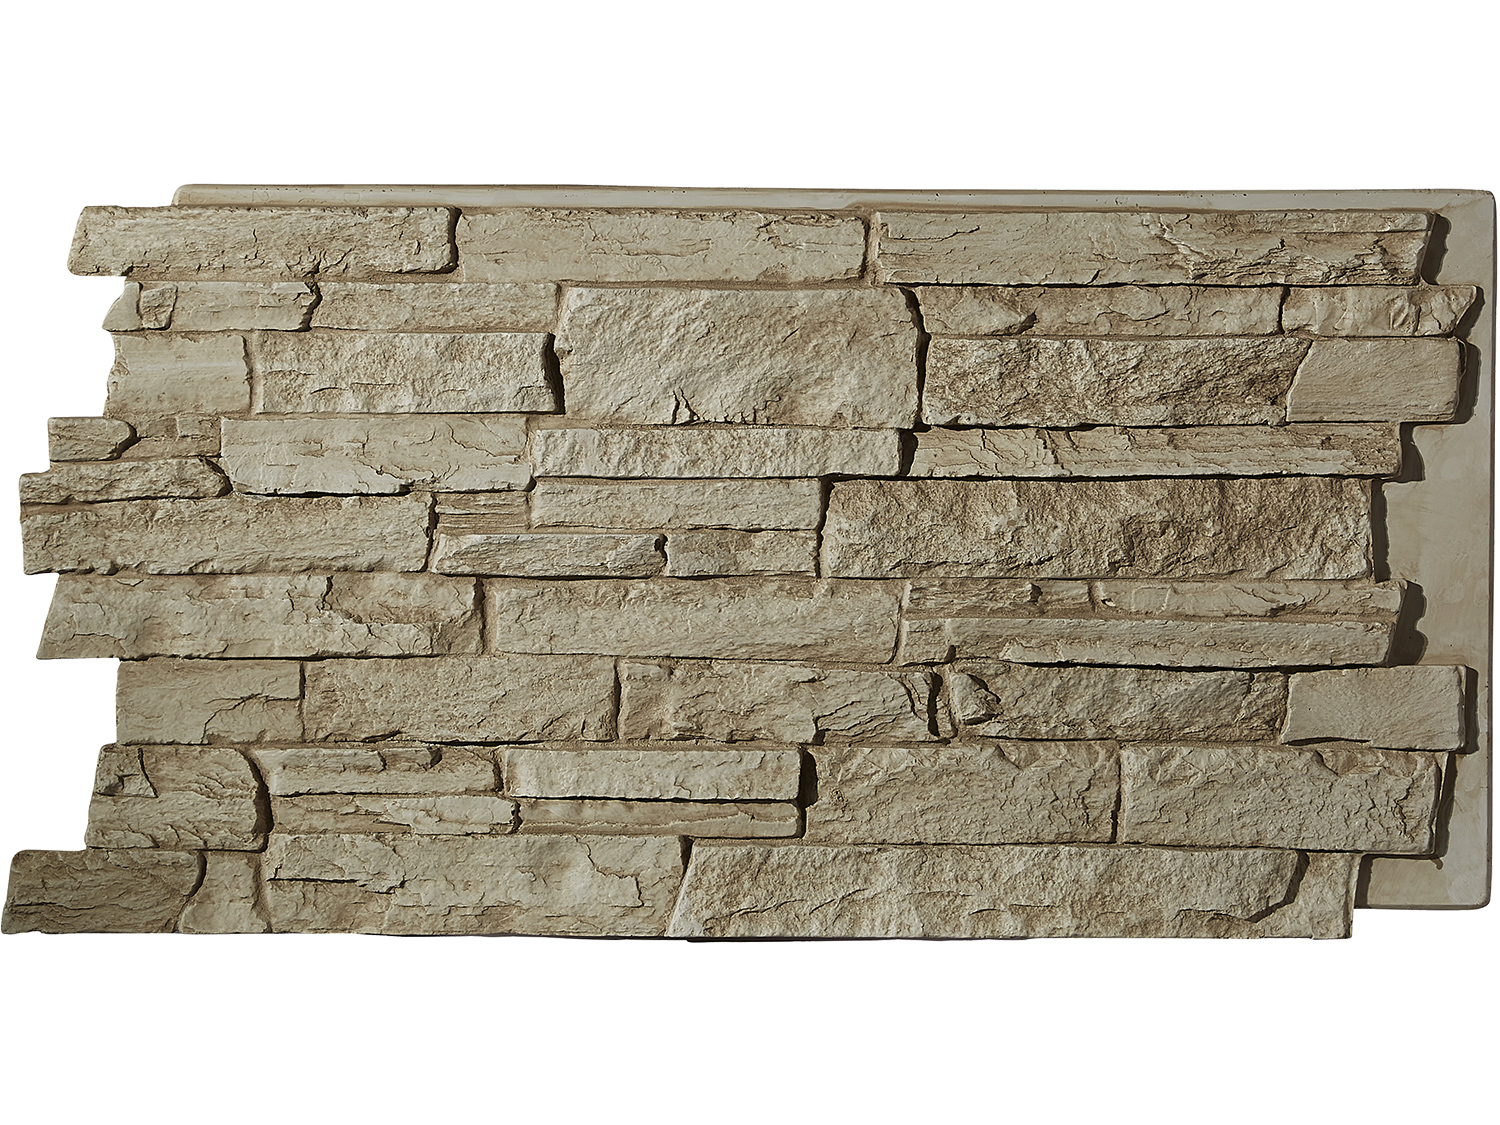 How many faux stone wall panels are included with the Dakota Dry Stack?